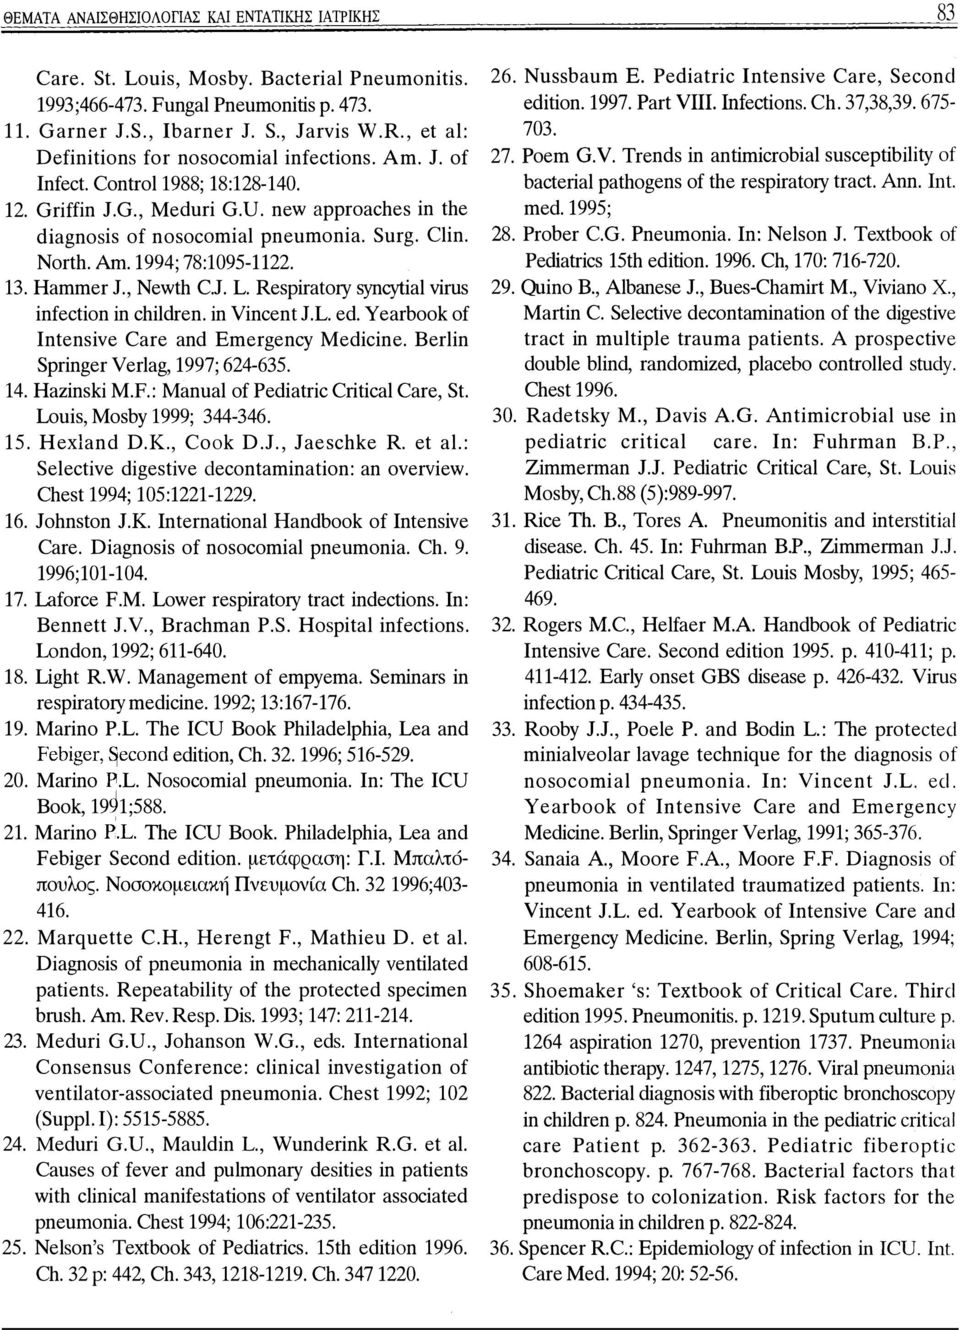 Am. 1994; 78:1095-1122. 13. Hammer J., Newth C.J. L. Respiratory syncytial virus infection in children. in Vincent J.L. ed. Yearbook of Intensive Care and Emergency Medicine.